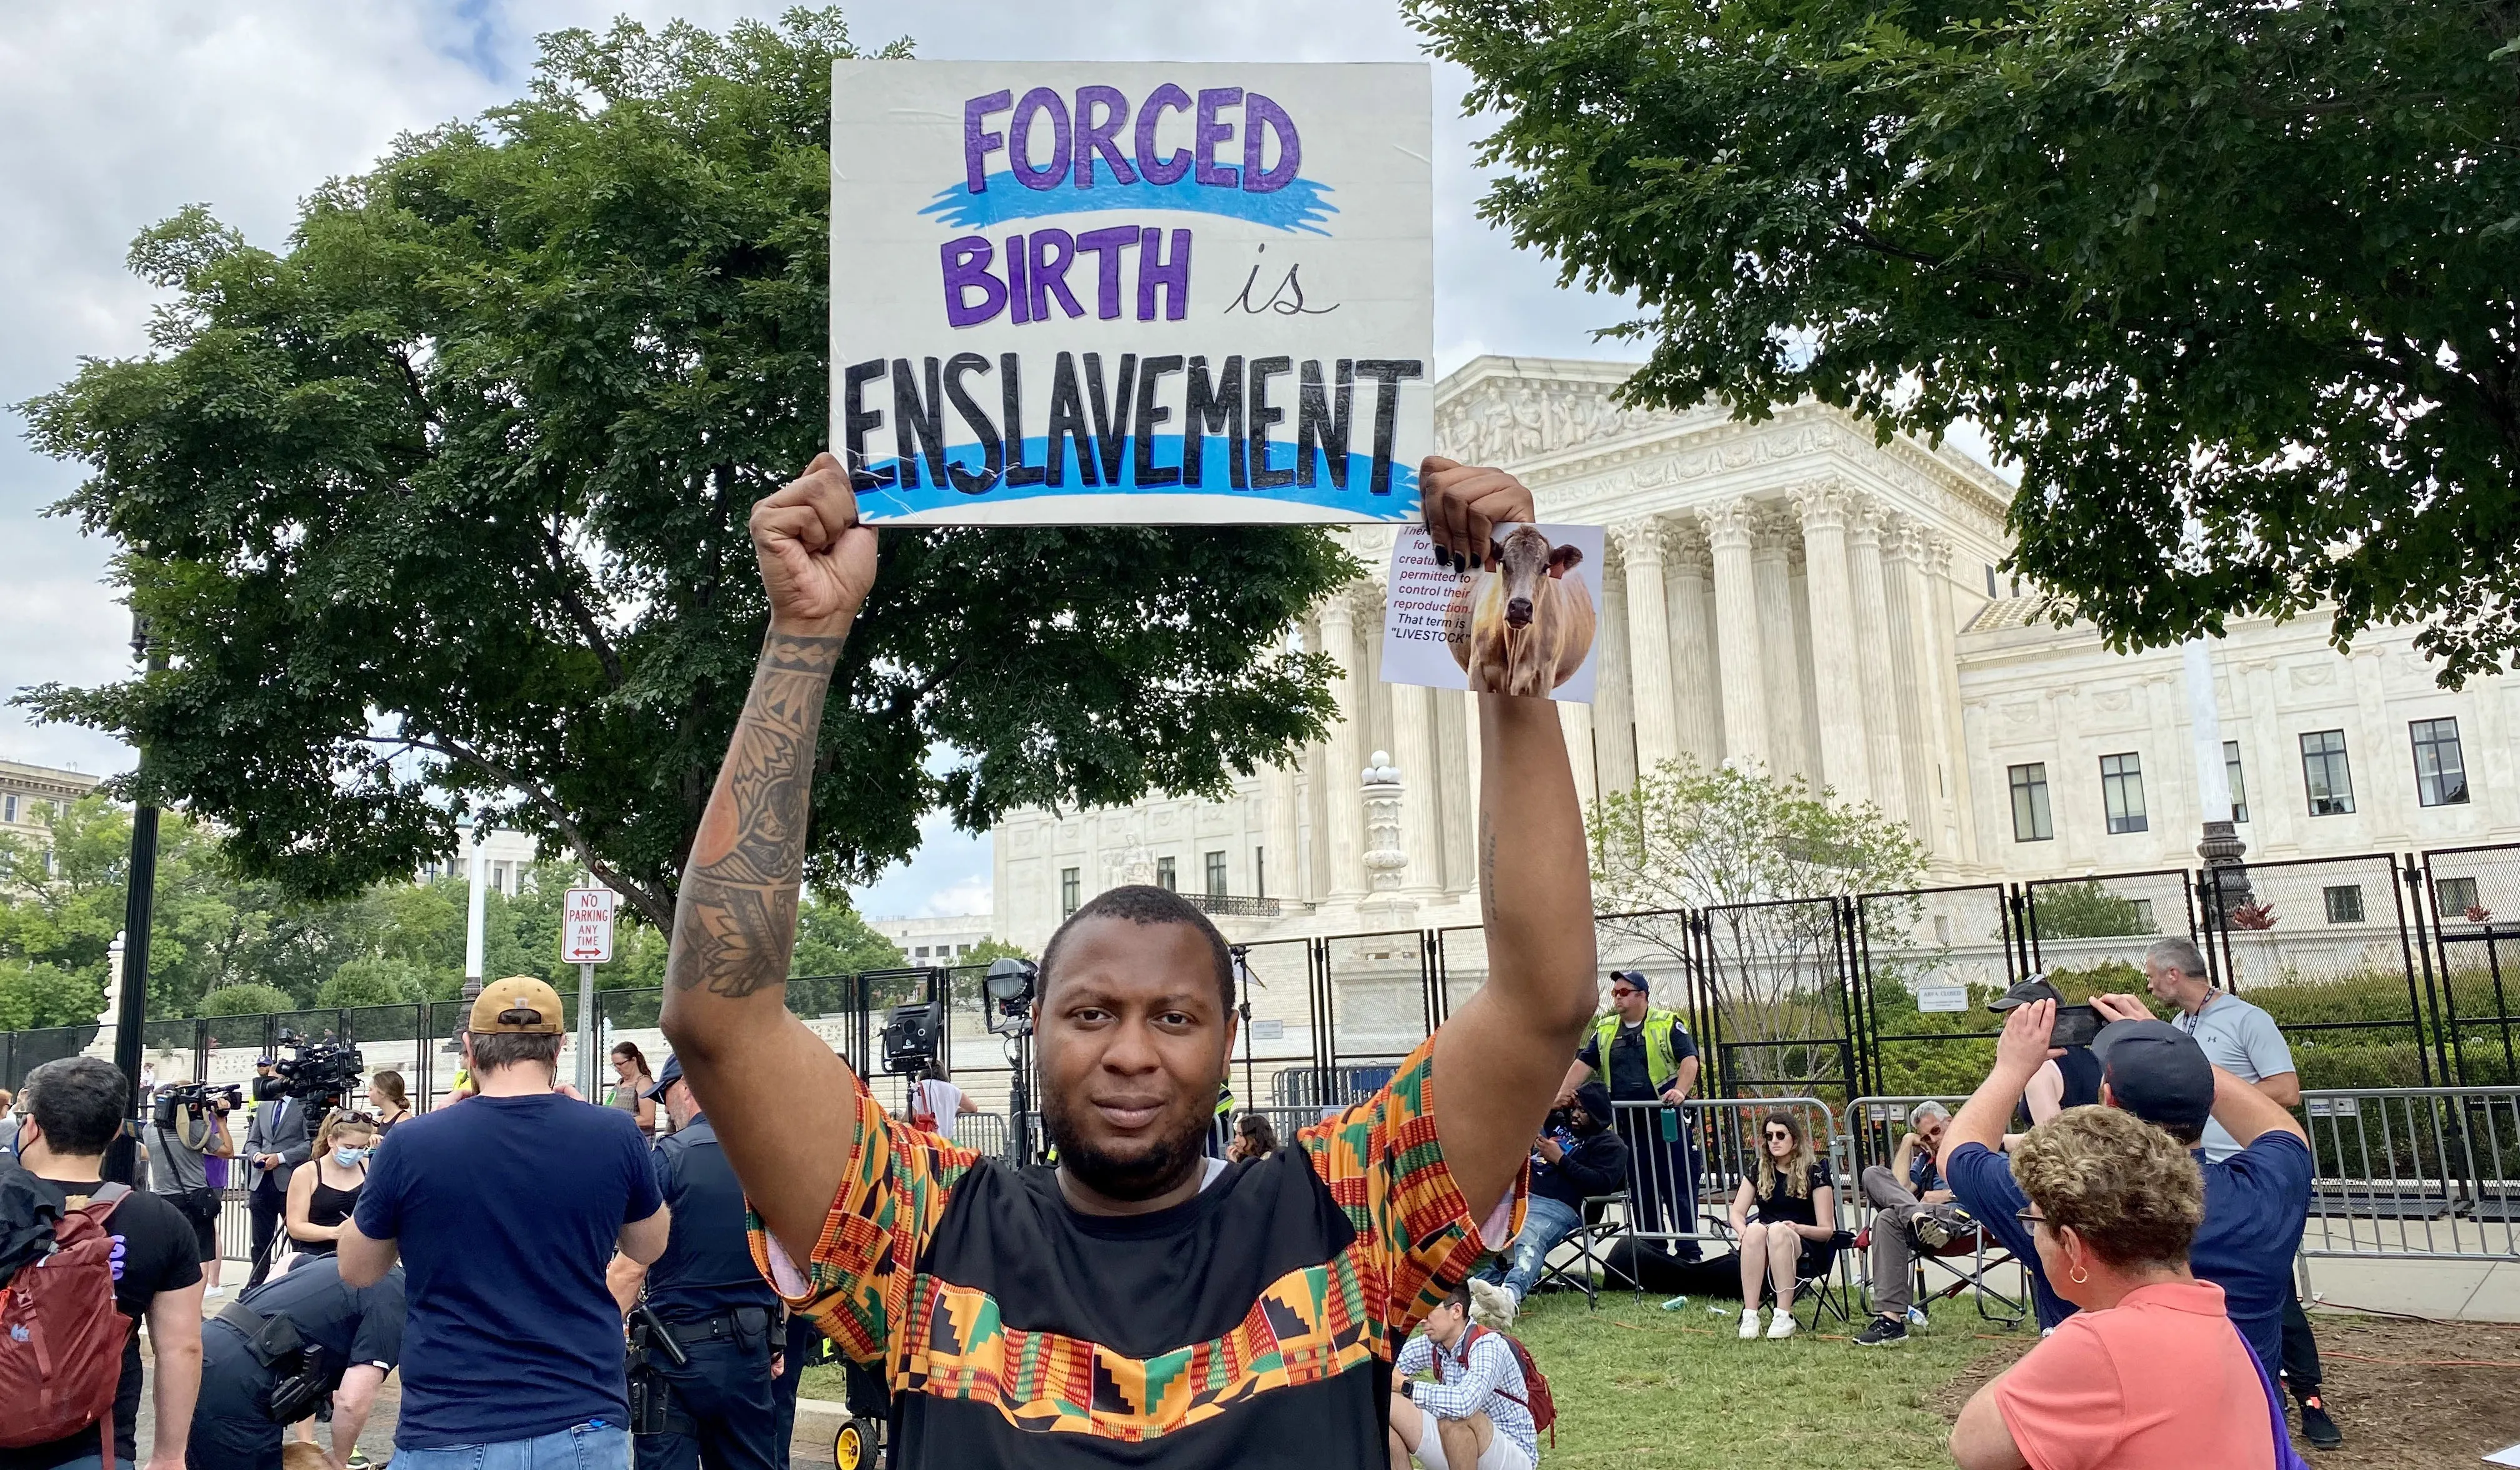 Joseph Little, a 32-year-old Washington, D.C. native who supports legalized abortion, holds a sign outside the U.S. Supreme Court in Washington, D.C., on June 24, 2022. Katie Yoder/CNA